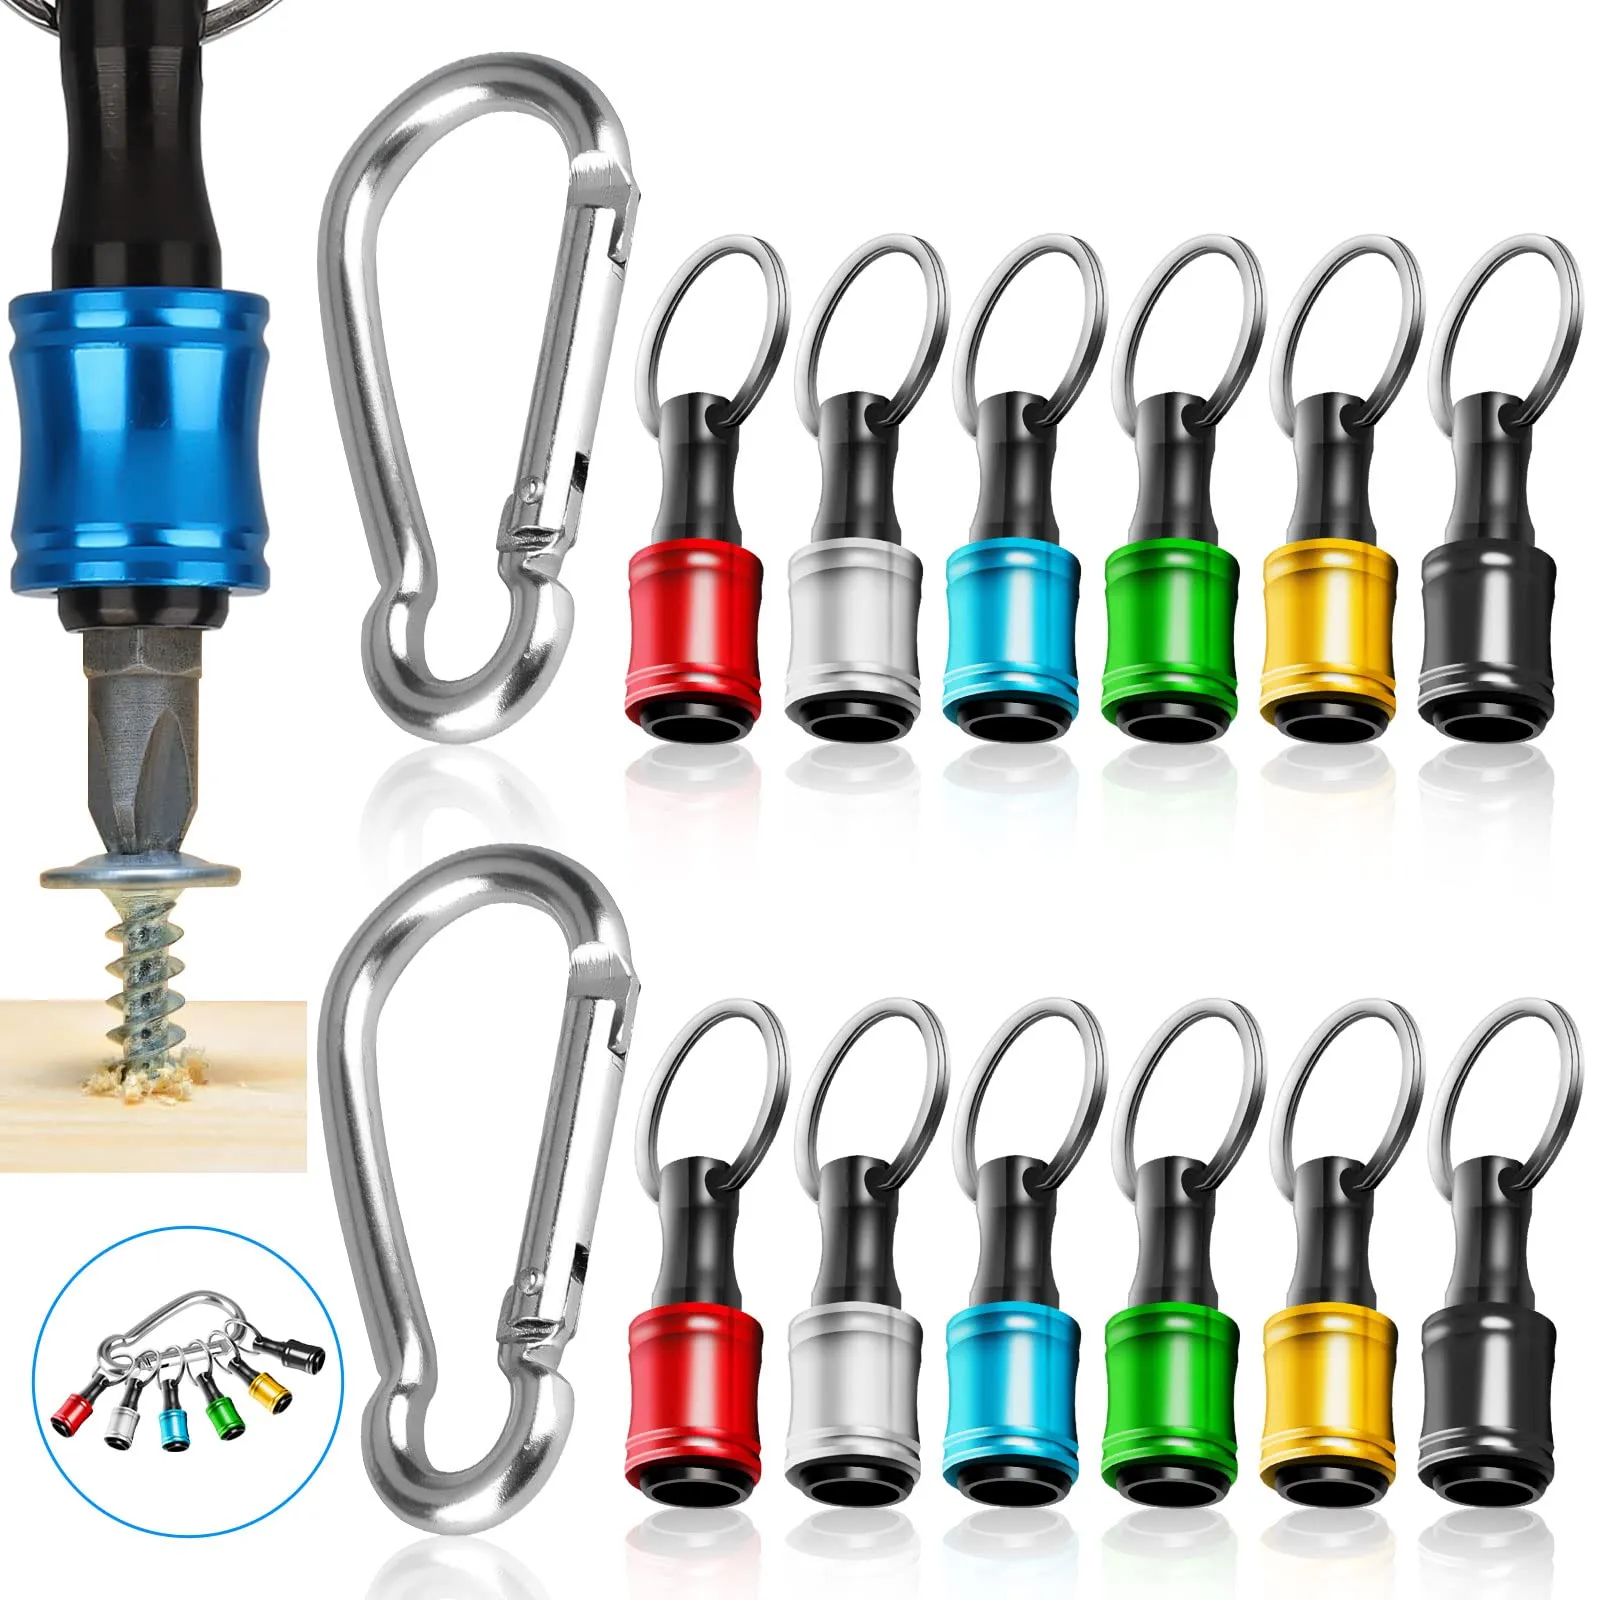 eyeglass repair screwdriver kit keychain 3 in 1 colorful mini precision screwdriver with keychaineyeglass sunglass watch jewelry electronics toy repair kit gold silver